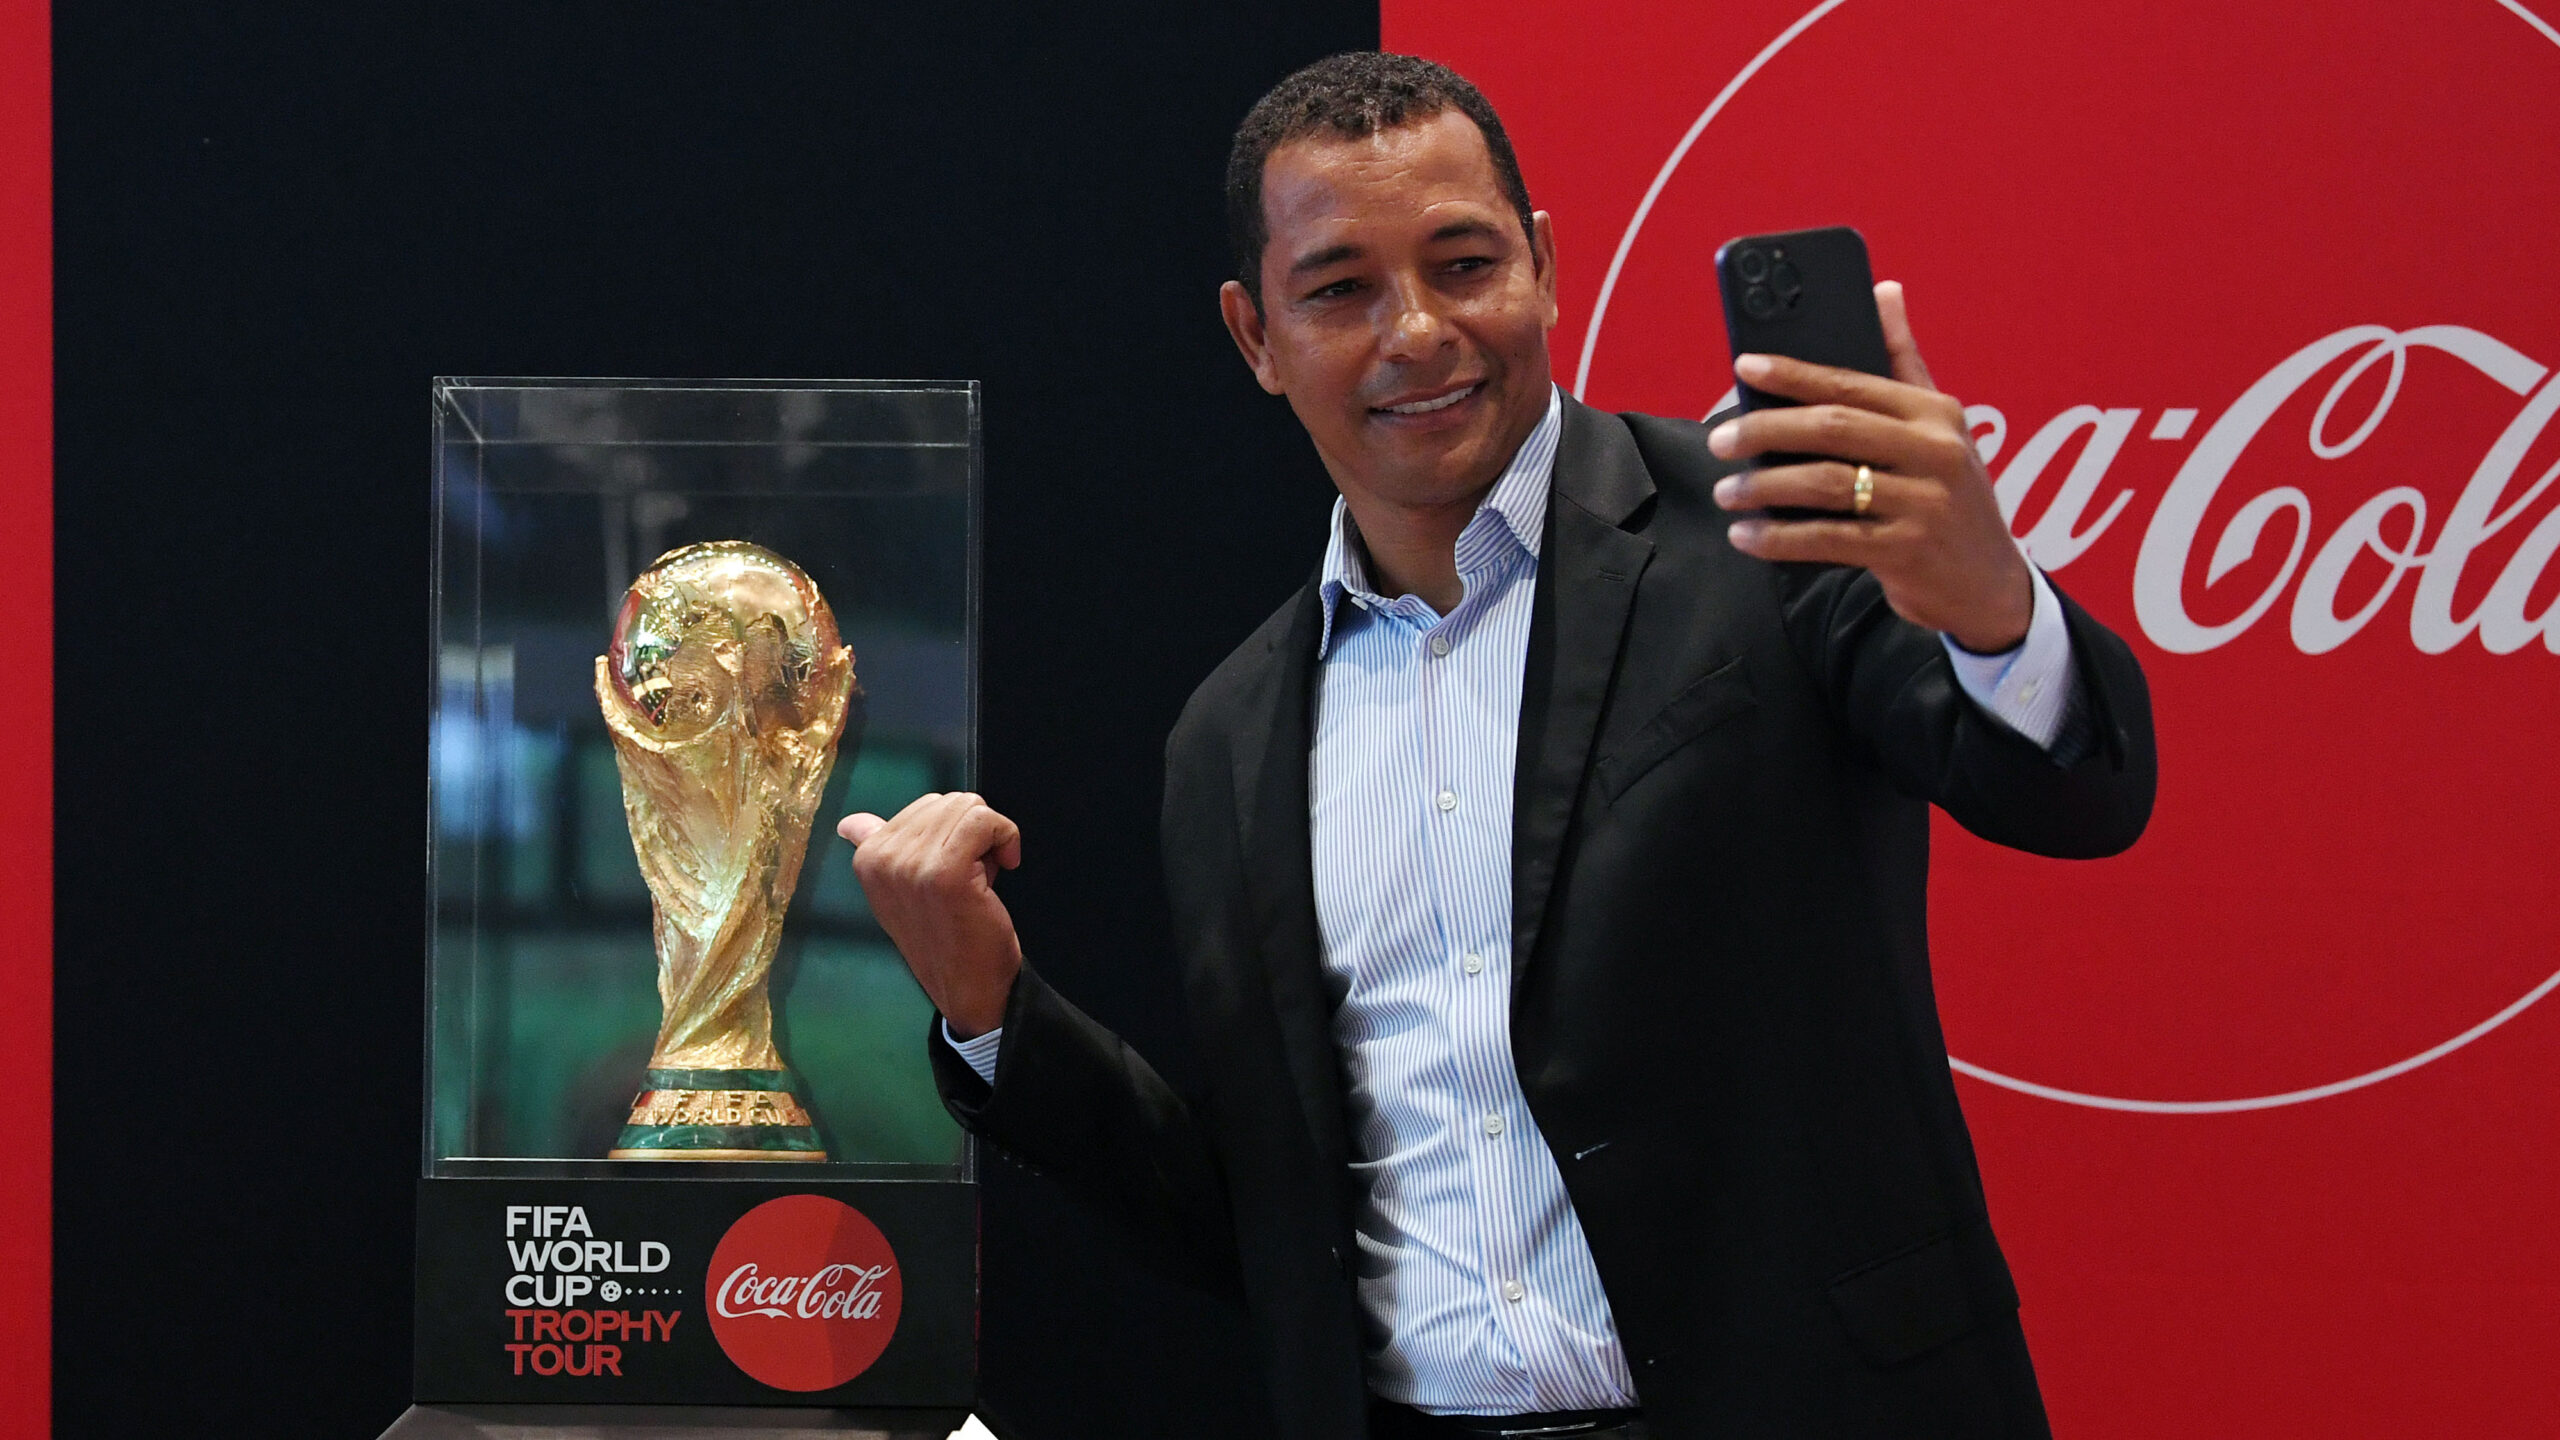 FIFA World Cup Trophy Tour will be in Ghana in September